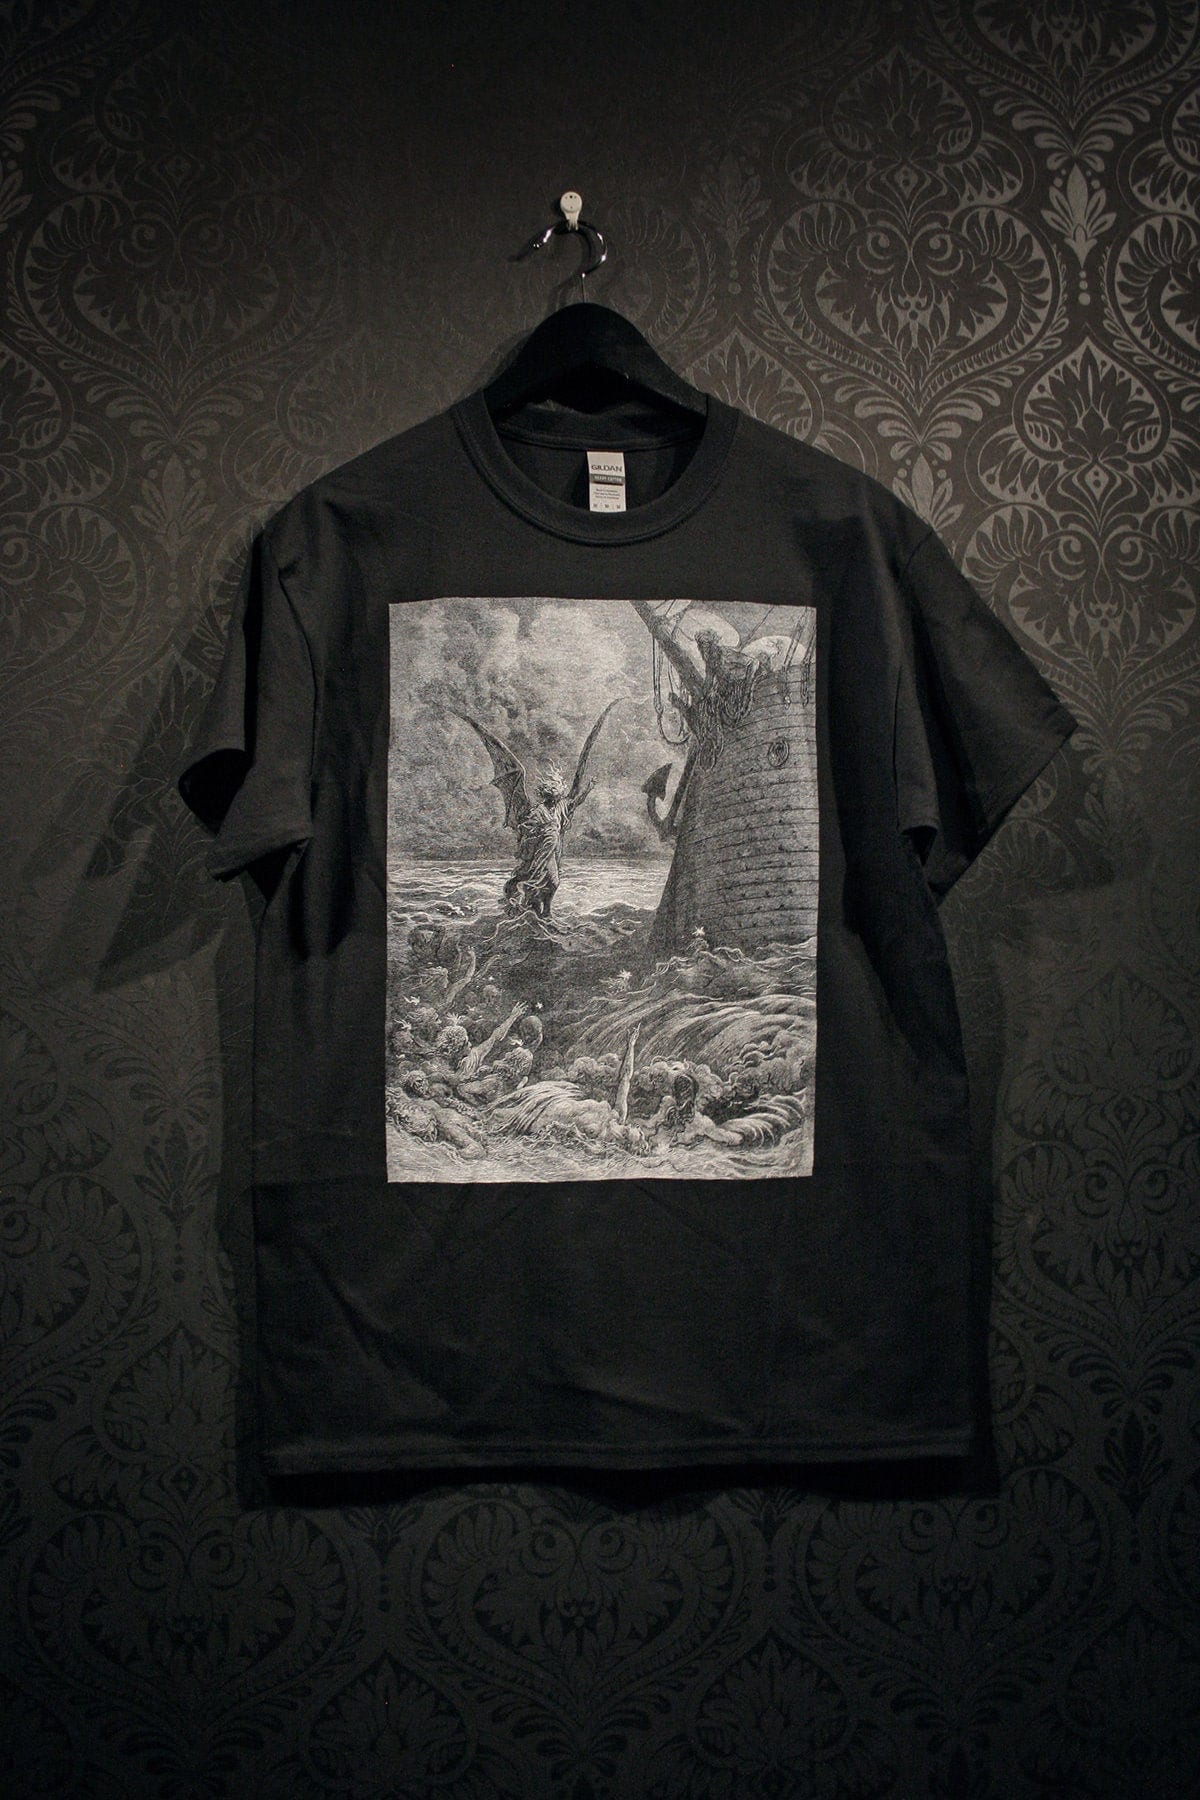 The Death-Fires Danced at Night, Rime of the ancient marine, illustration by Gustave Doré - T-shirt